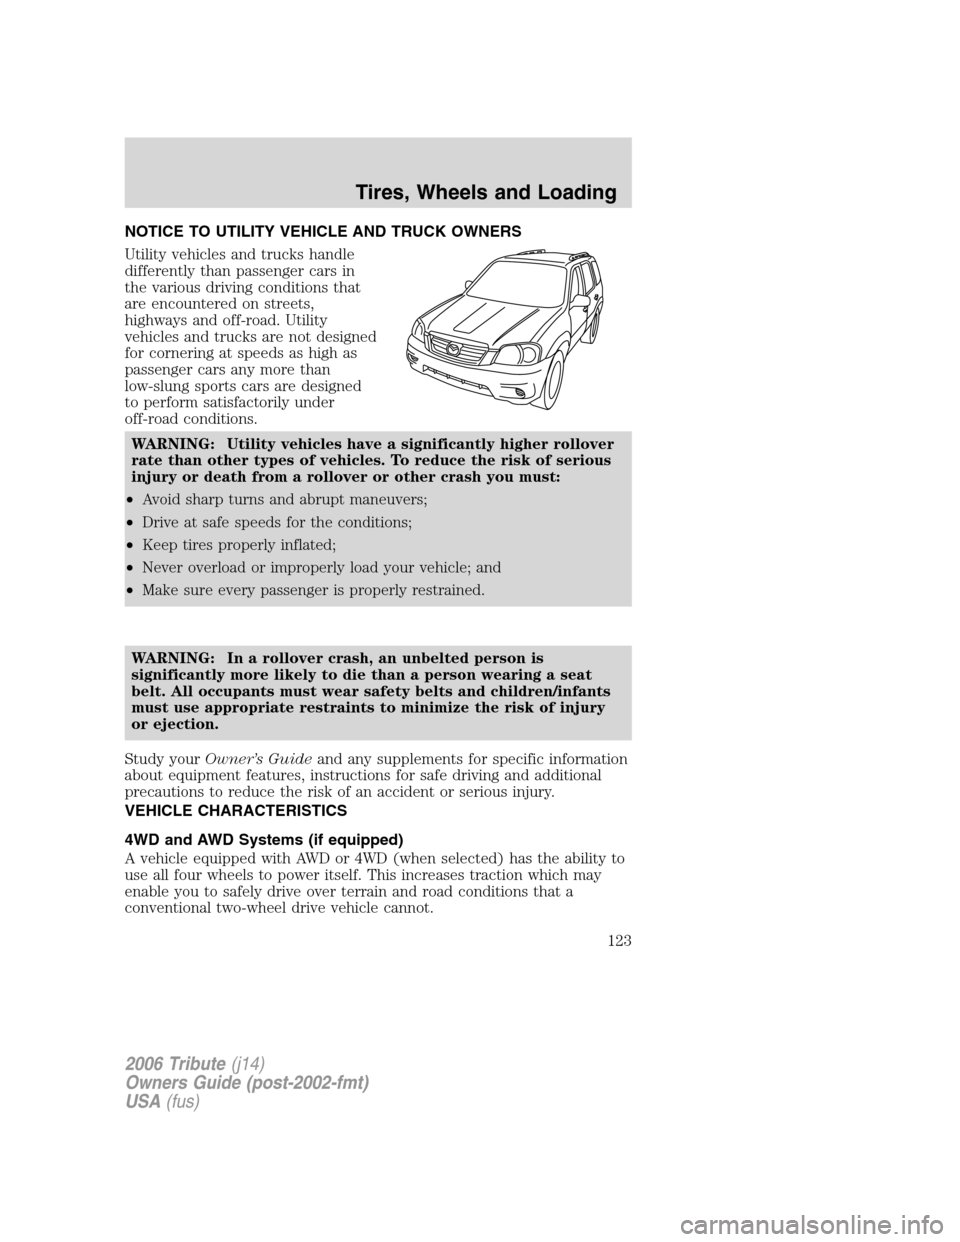 MAZDA MODEL TRIBUTE 2006  Owners Manual (in English) NOTICE TO UTILITY VEHICLE AND TRUCK OWNERS
Utility vehicles and trucks handle
differently than passenger cars in
the various driving conditions that
are encountered on streets,
highways and off-road. 